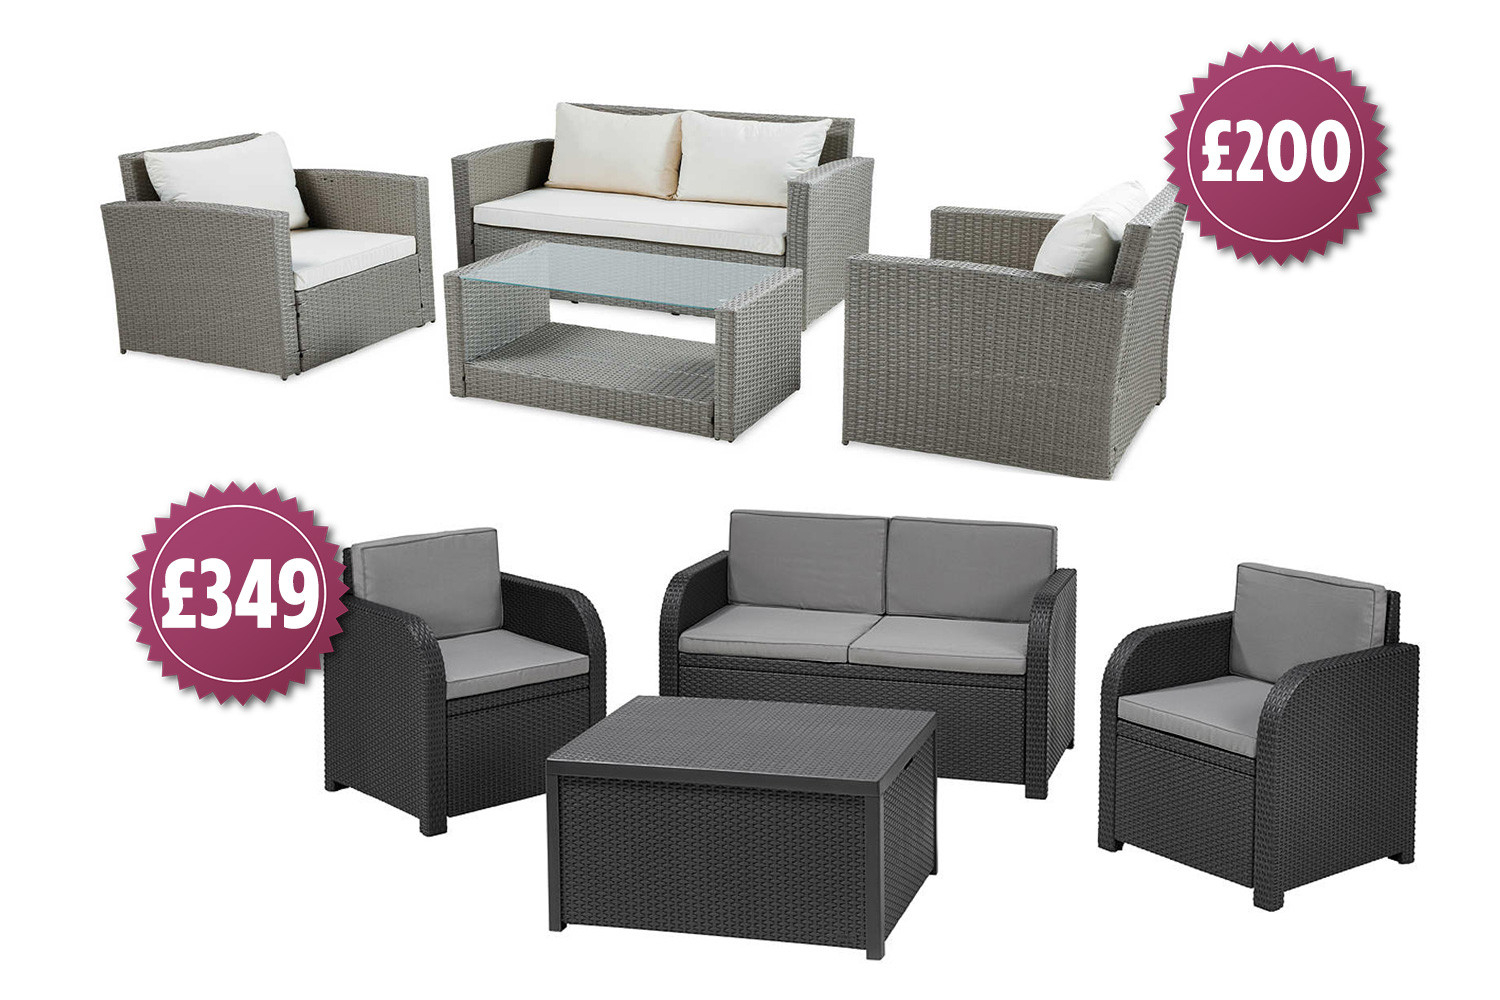 Aldi Is Selling A Beautiful Garden Furniture Set And Its regarding dimensions 1500 X 1000